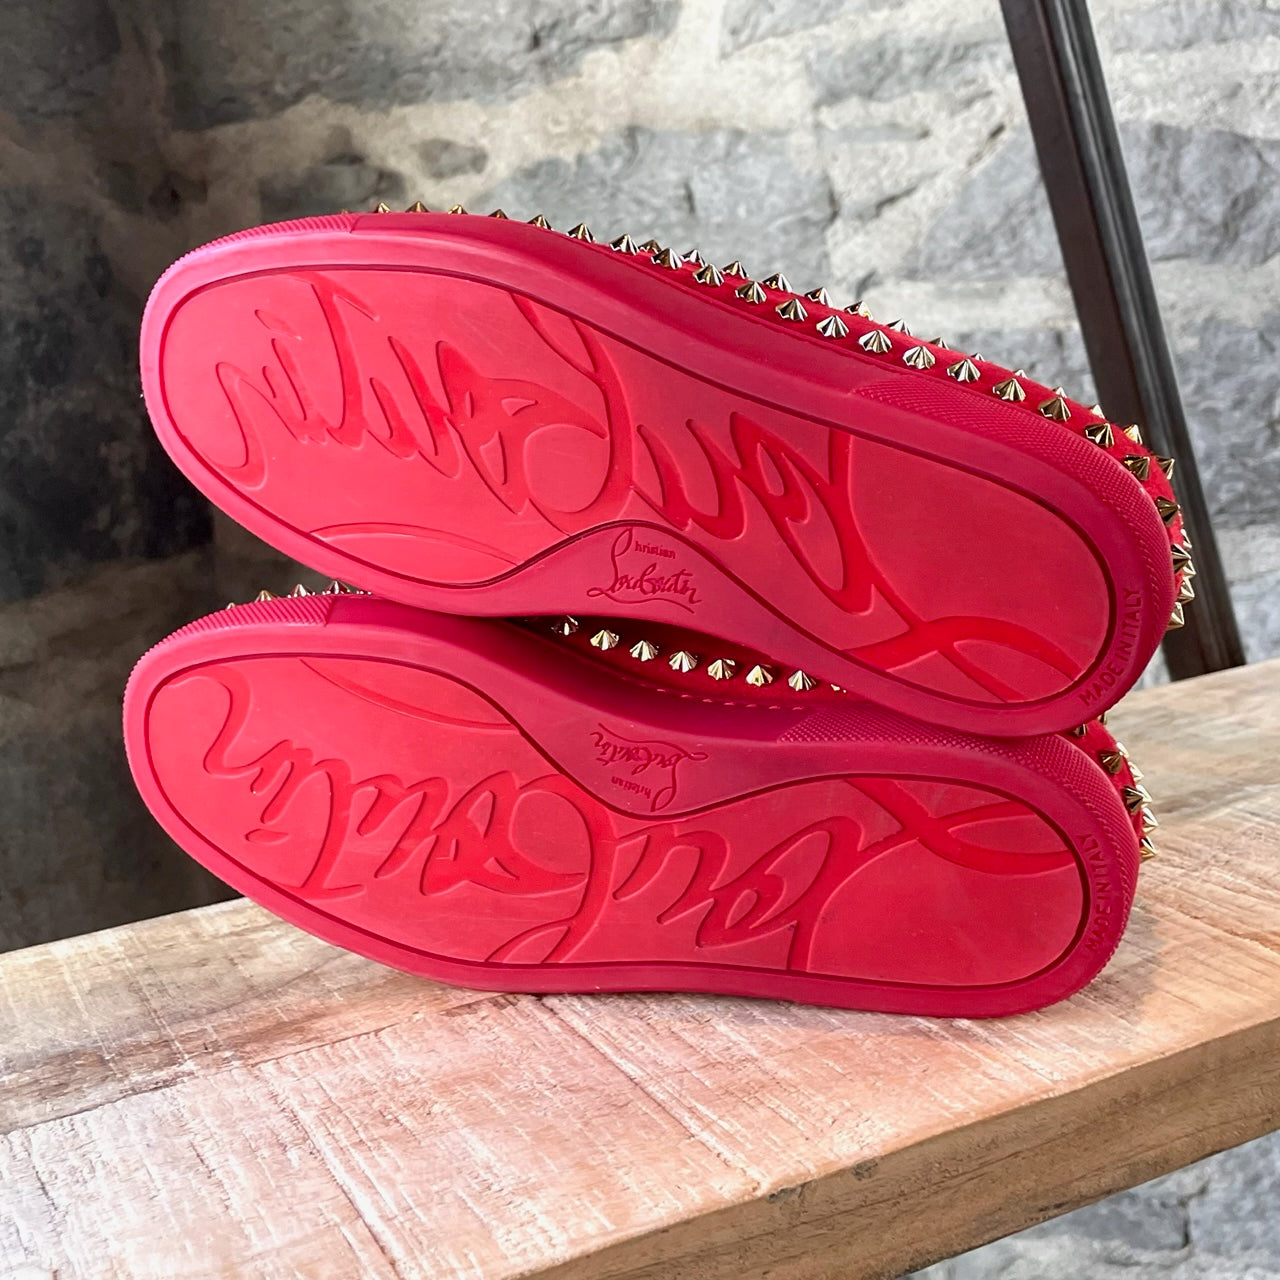 red bottoms shoes for men | Christian louboutin sneakers, Red bottom shoes,  Online shopping shoes